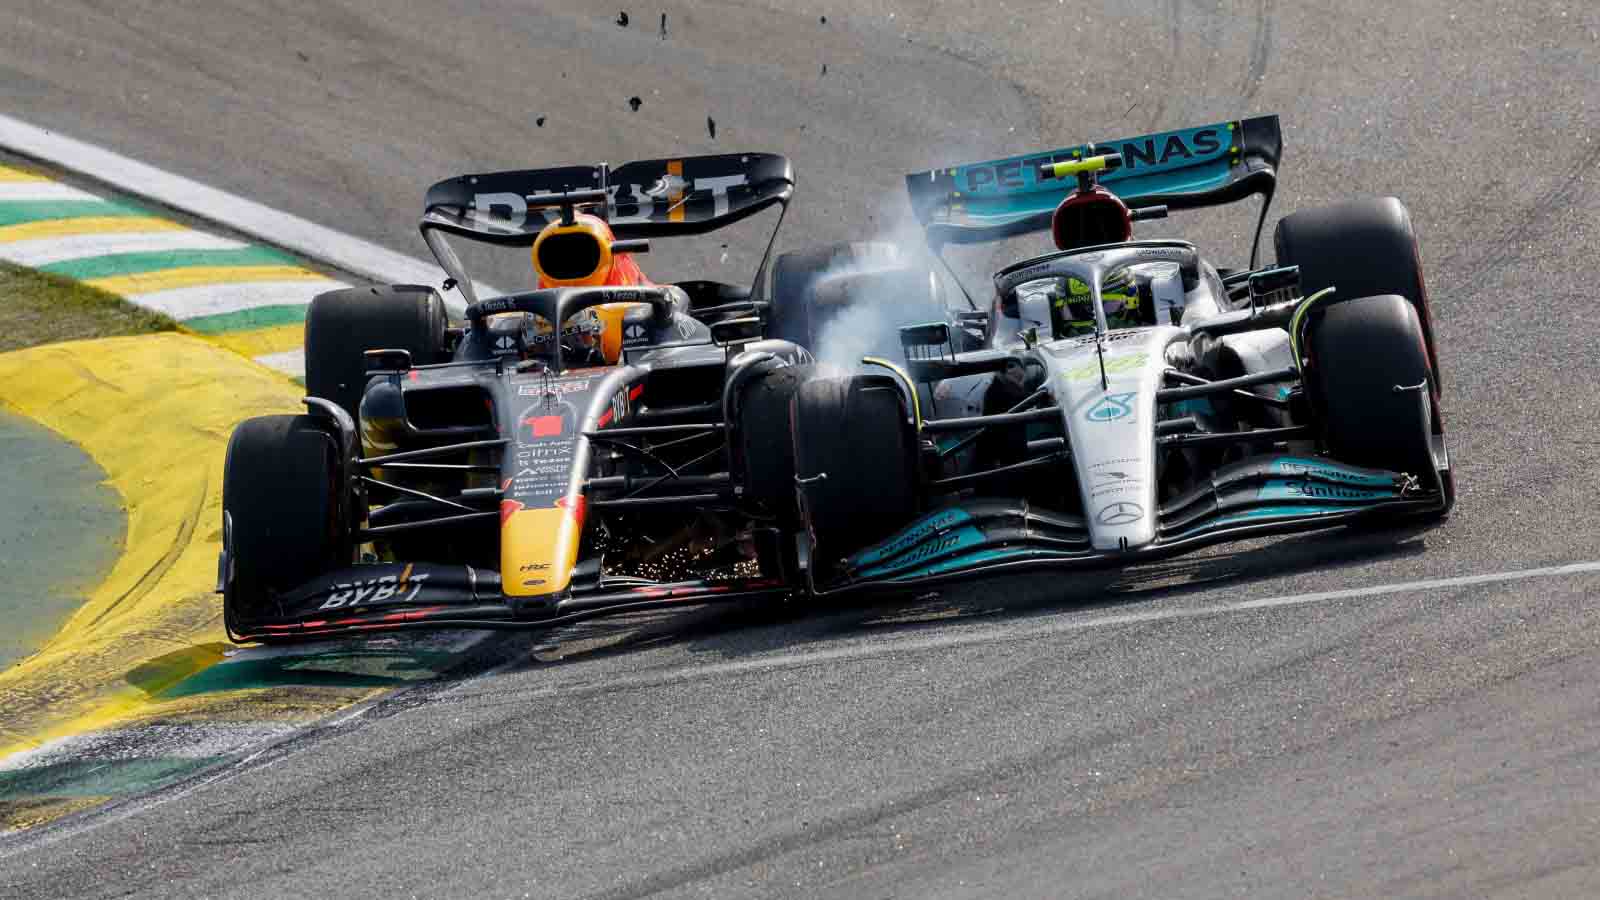 Stewards give Verstappen’s penalty points for the Hamilton accident